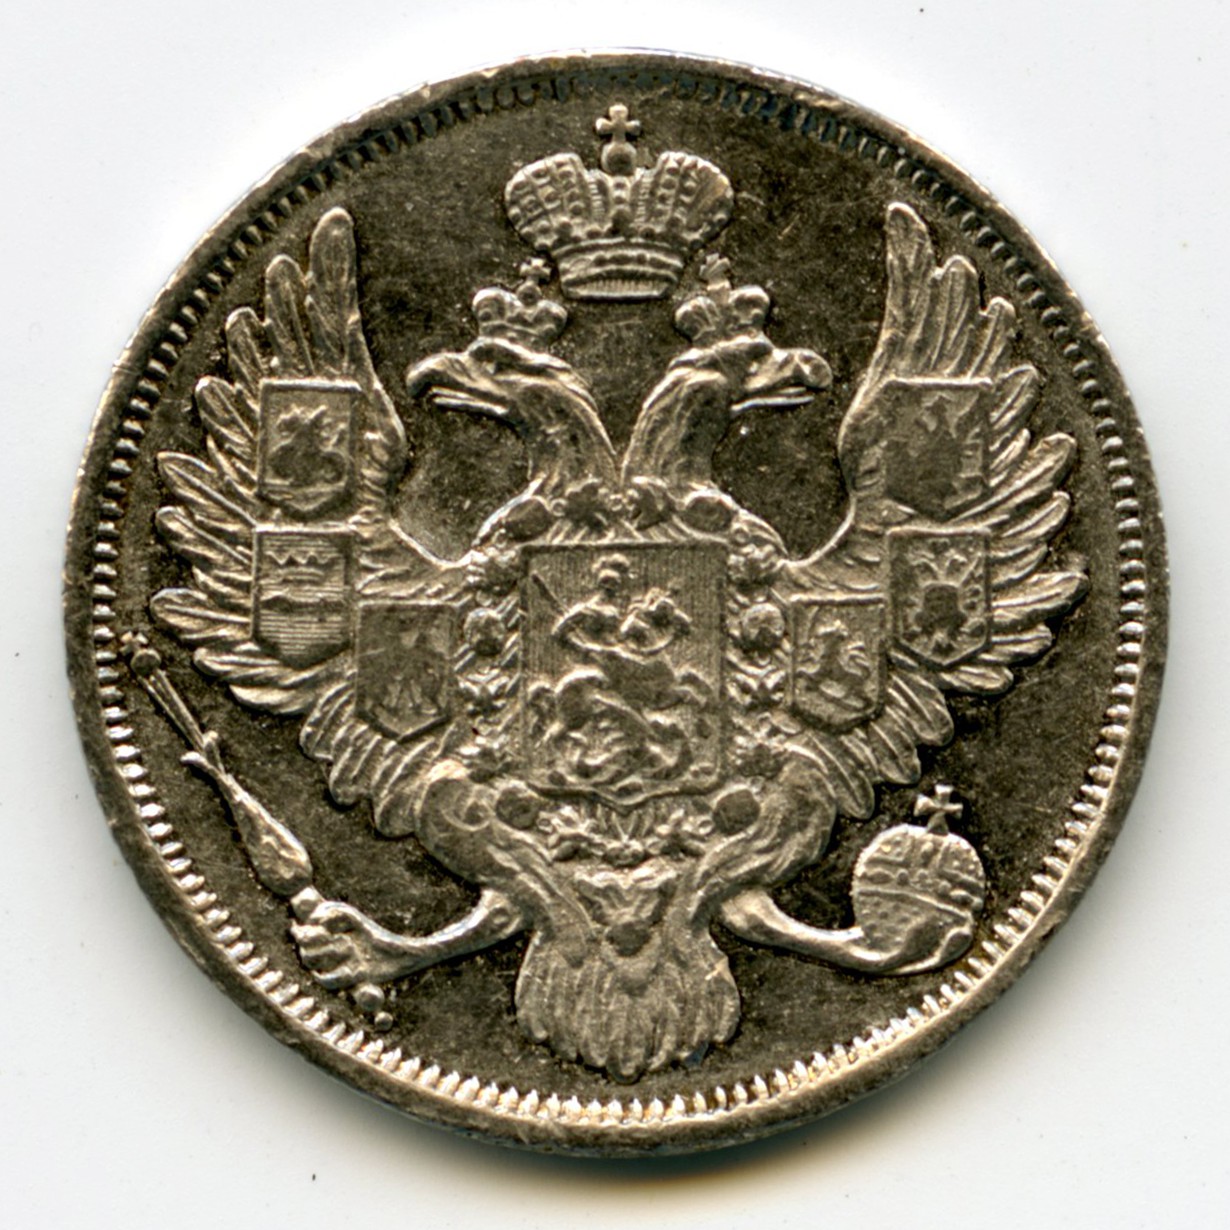 Russie - 3 Roubles Platine - 1844 avers